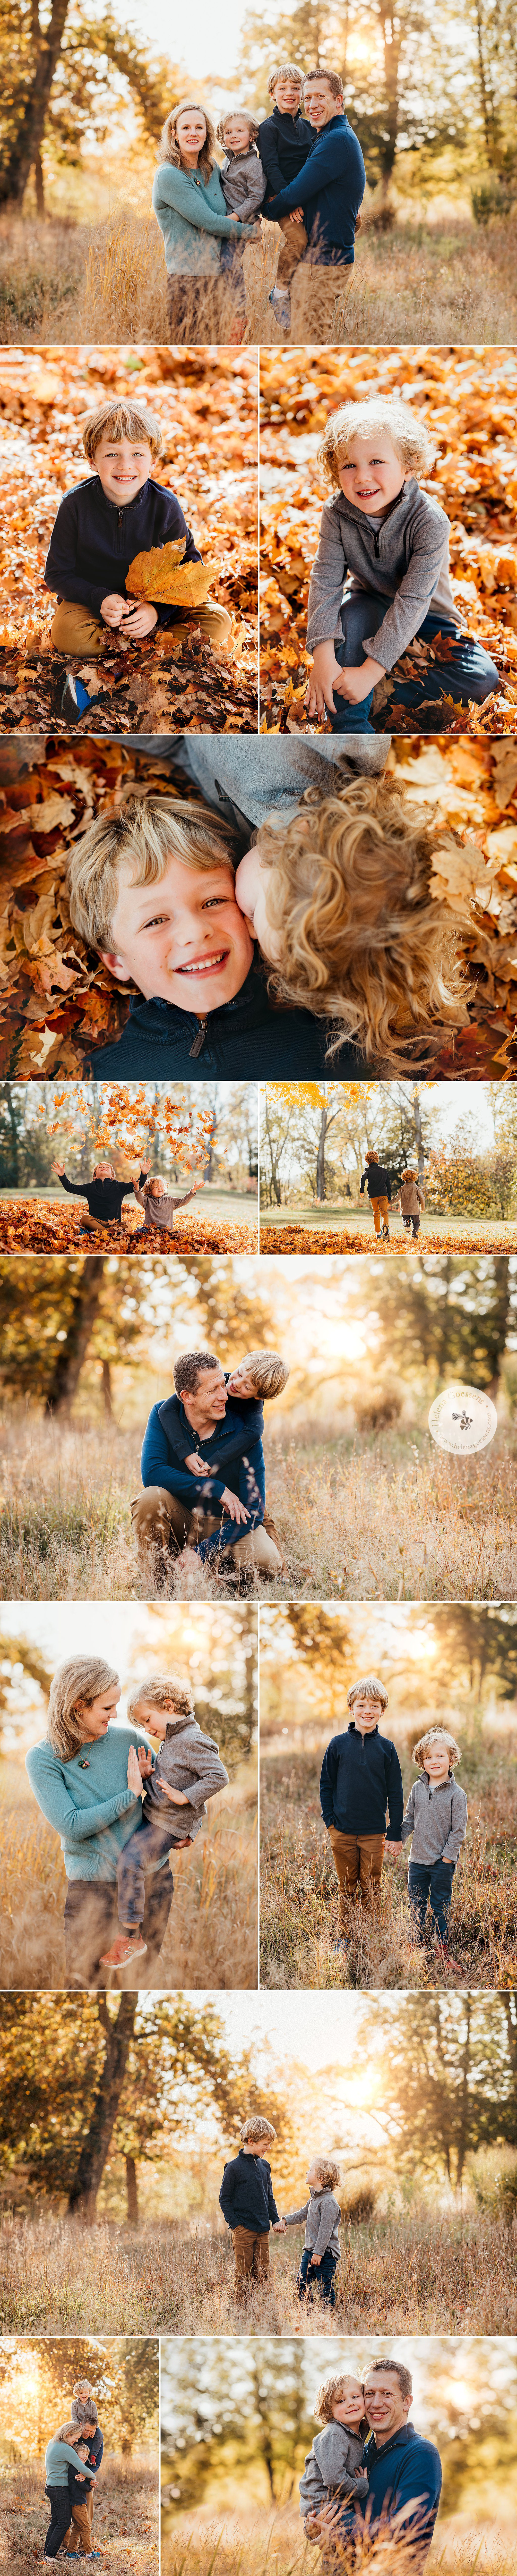 Fall Family Portraits with Newton Family Photographer at The Old Manse with vibrant yellow and orange leaves photographed by Helena Goessens Photography. 